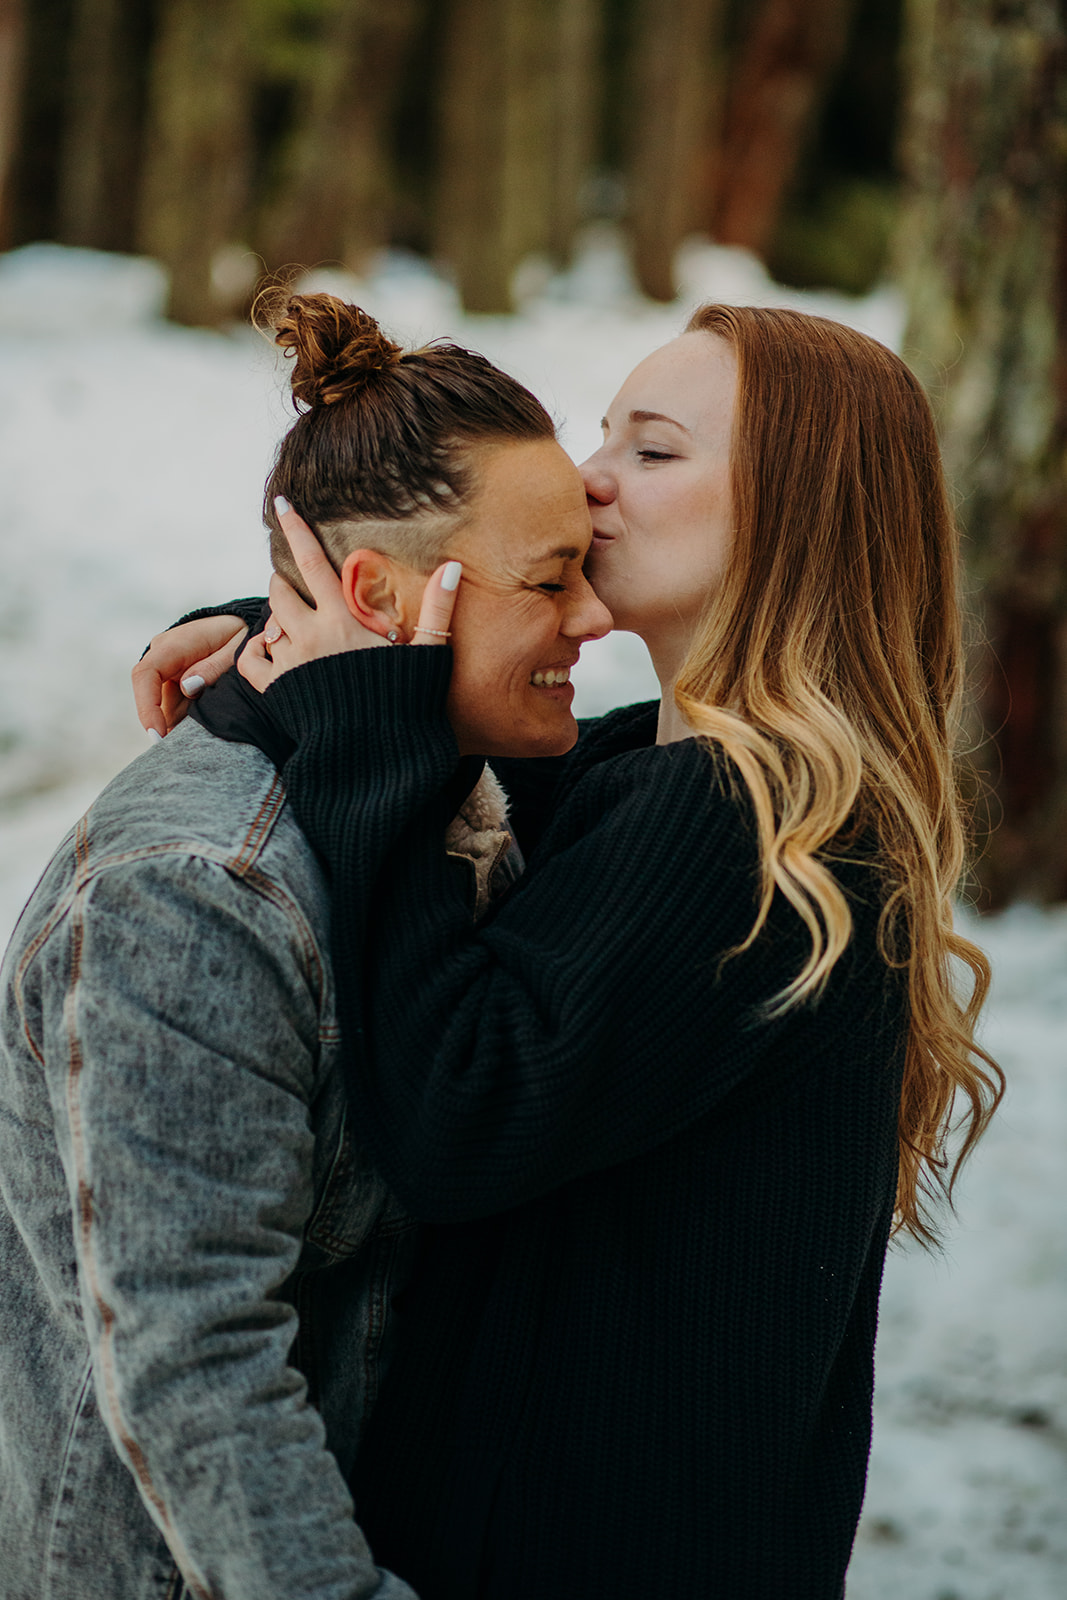 Woman kissing her partner on the forehead during snowy engagement session